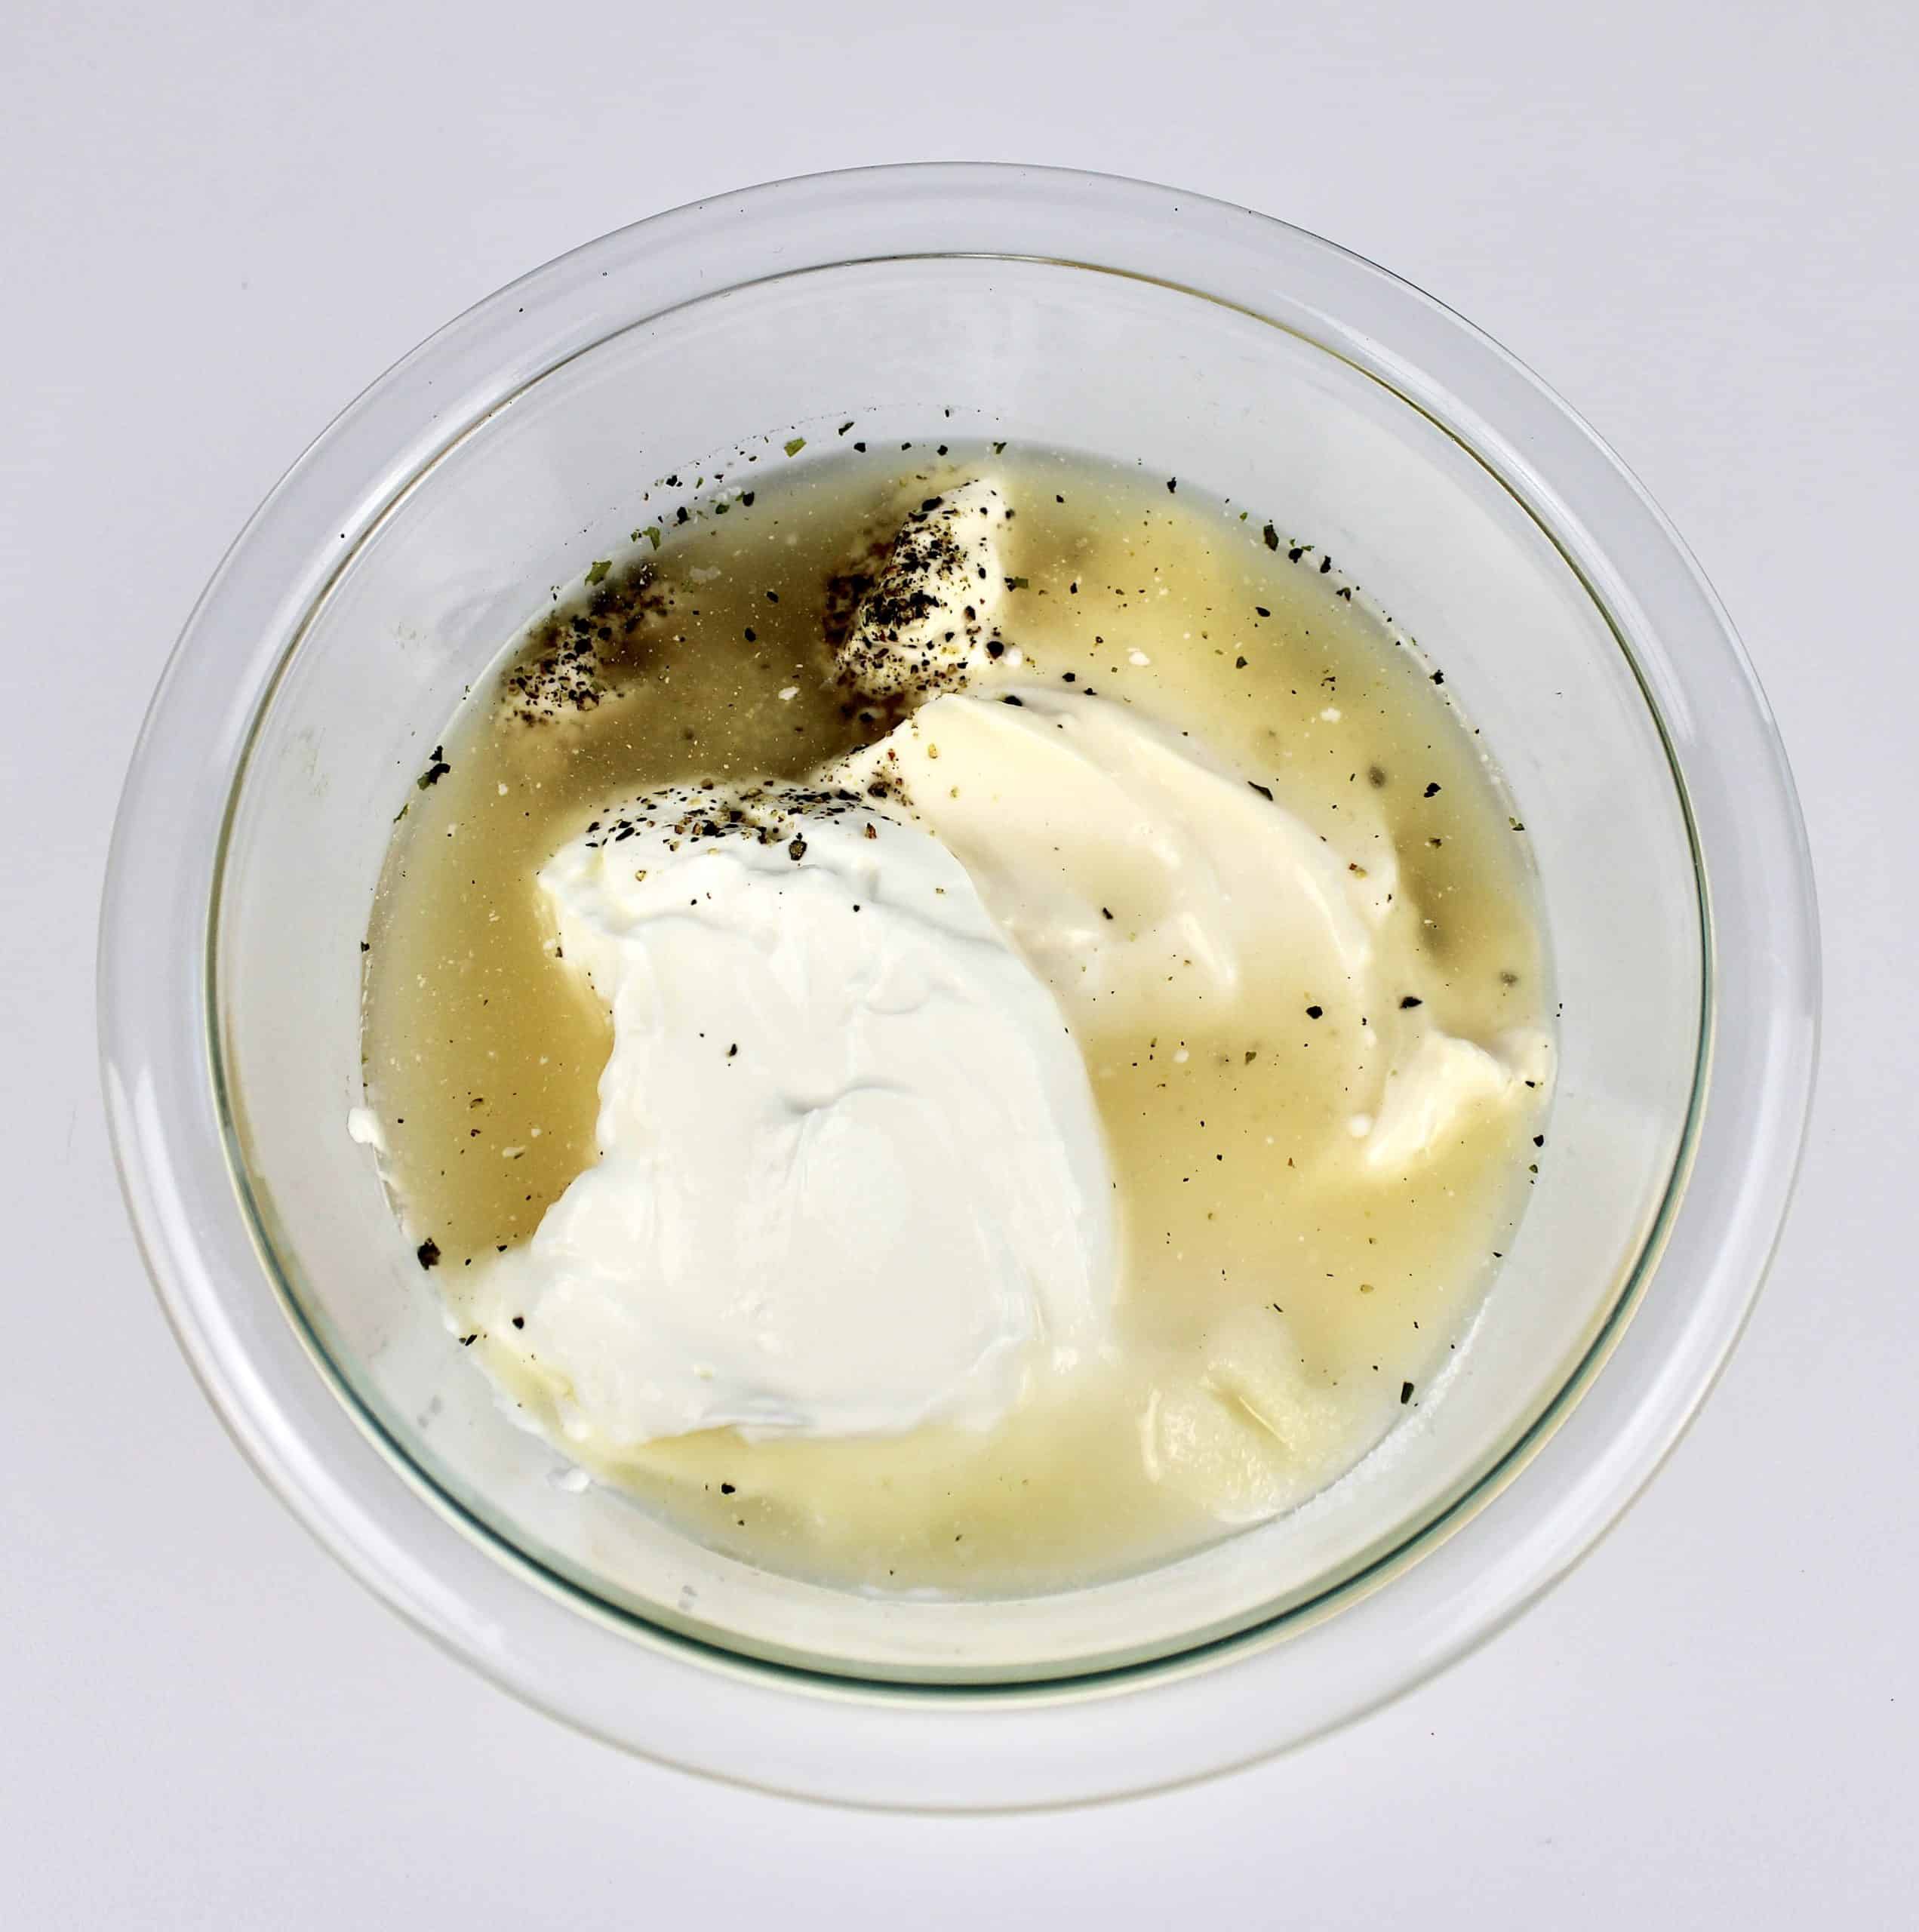 sour cream mayonnaise vinegar and spices in bowl unmixed